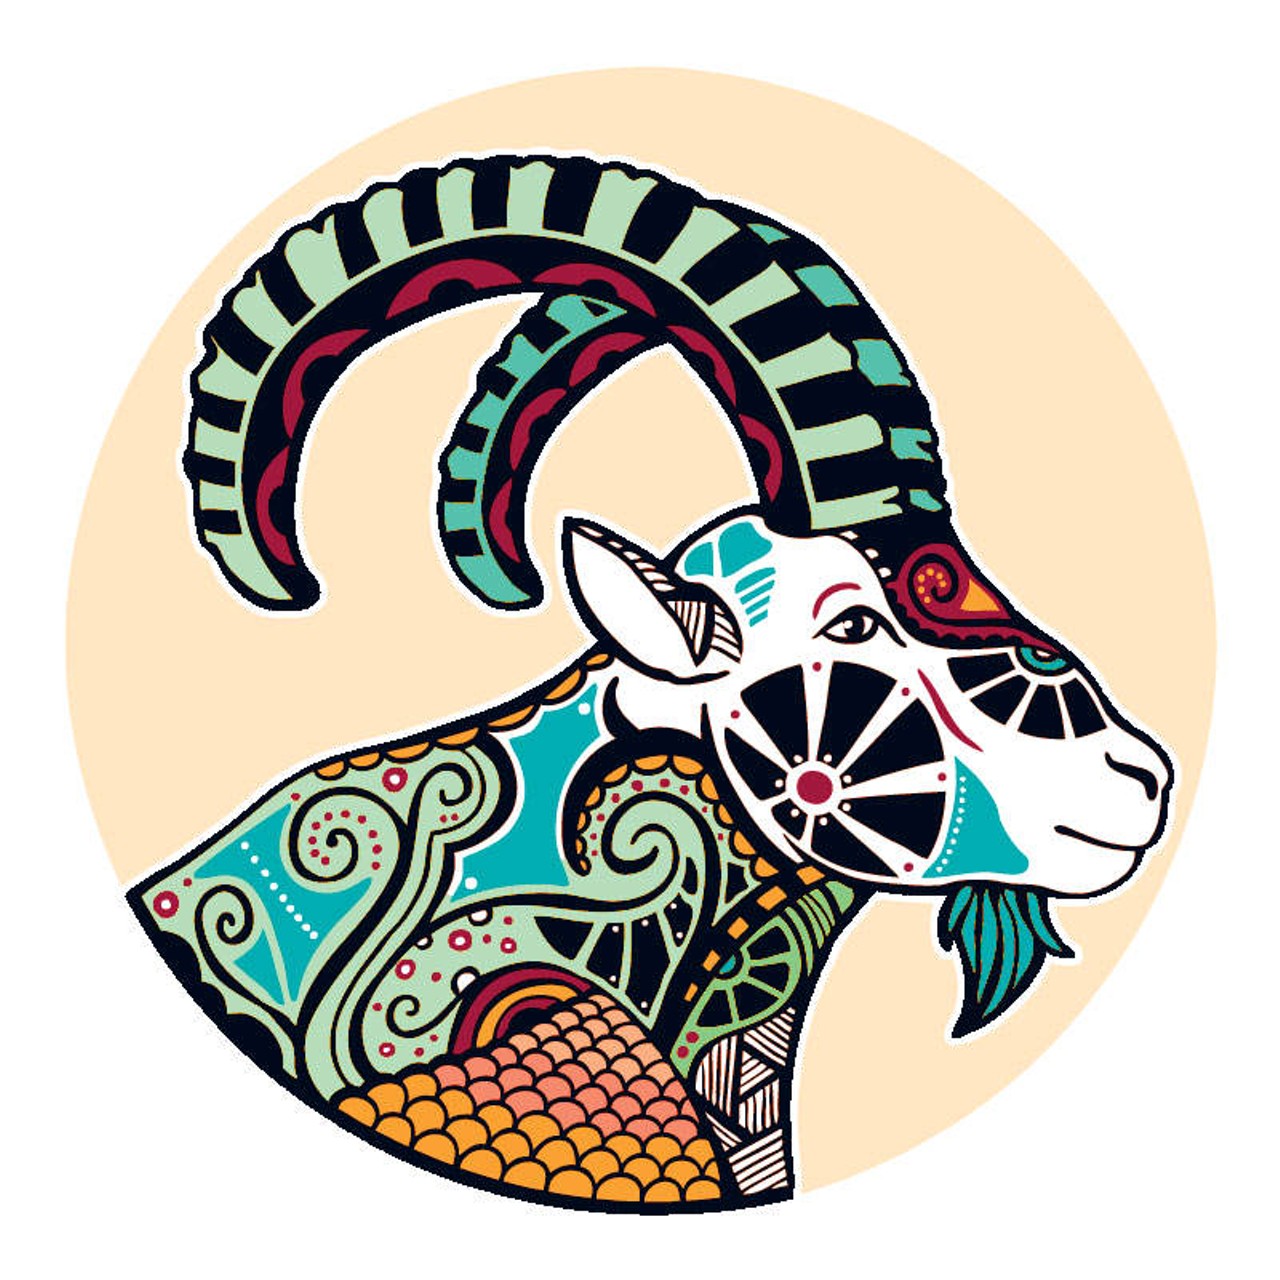 CAPRICORN: Dec. 21 - Jan. 20
You could be in over your head, in ways that are hard to pin down. Nobody can tell how hard this is for you &#151; mainly because you're geared for situations that turn out to be more than you can handle. As you keep your chin up and your mouth shut, more than one thing is not going as planned. I see more chaos than usual. I see people and things testing your limits, along with a need to set clearer boundaries and stop being so wishy-washy about making tough decisions and sticking by them. This is a huge karmic milestone. Don't mess it up. Everything matters right now.